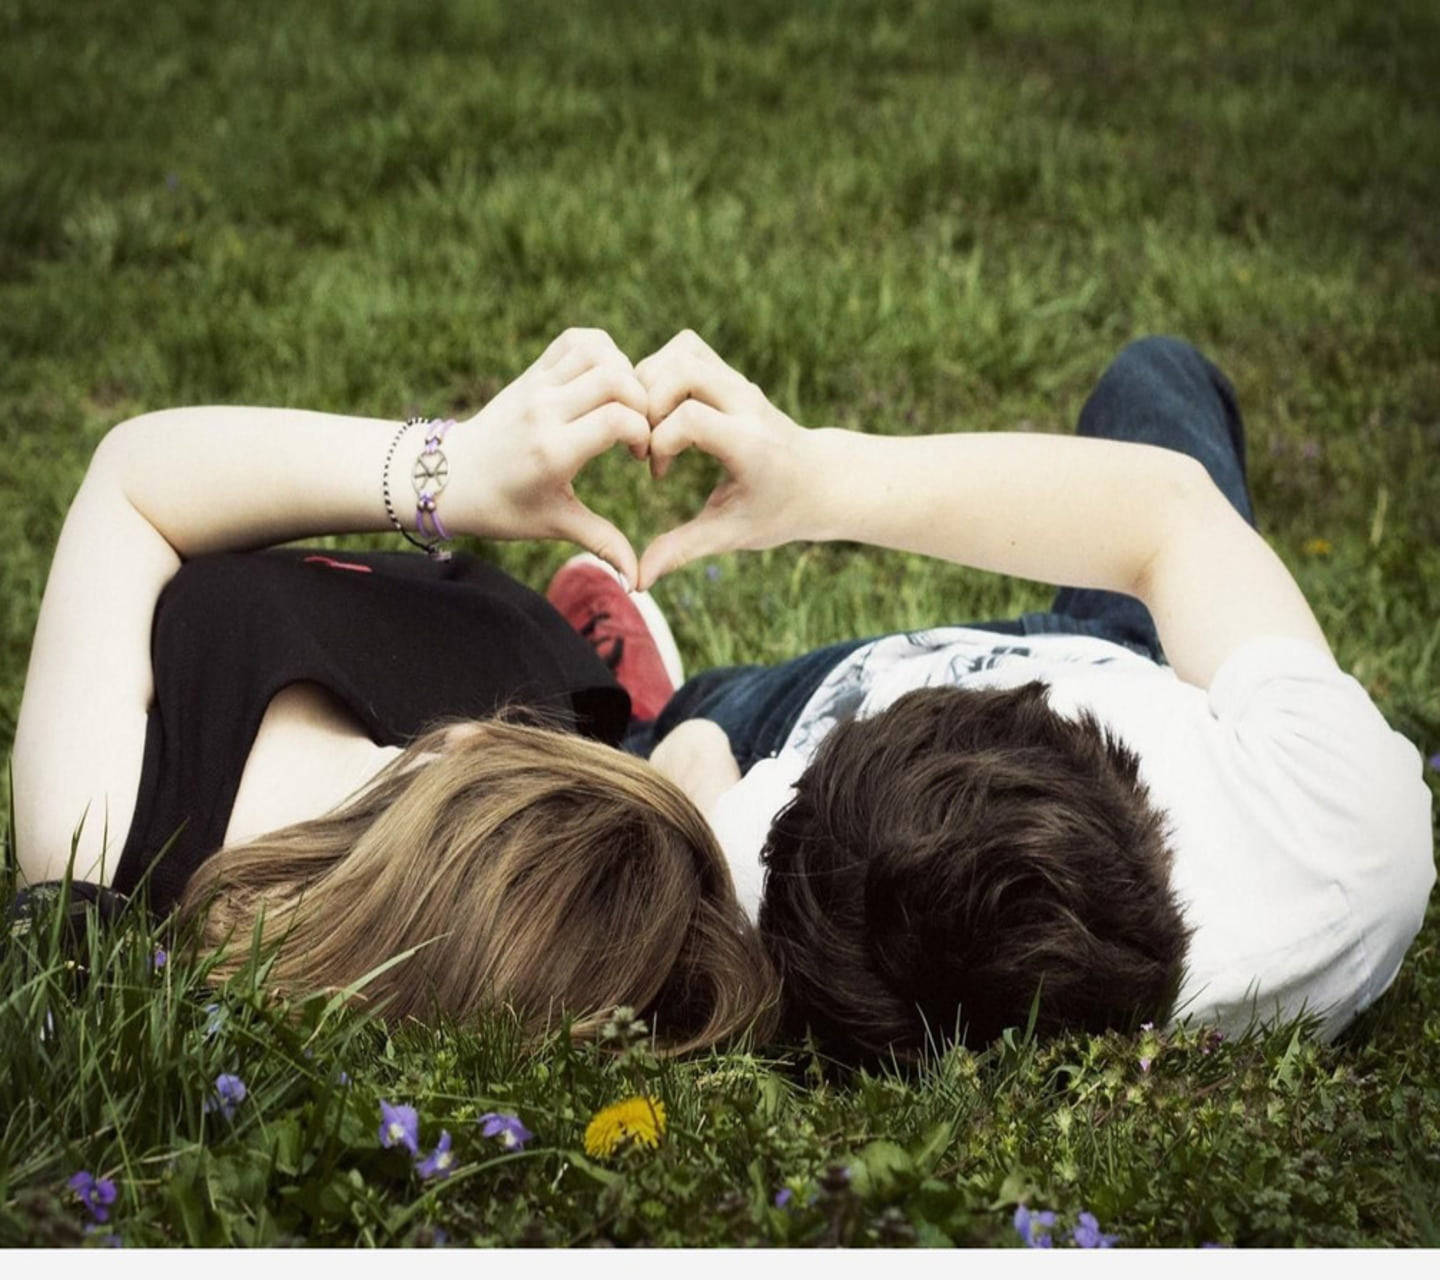 Cute Couple Making Cute Heart On Grass Background